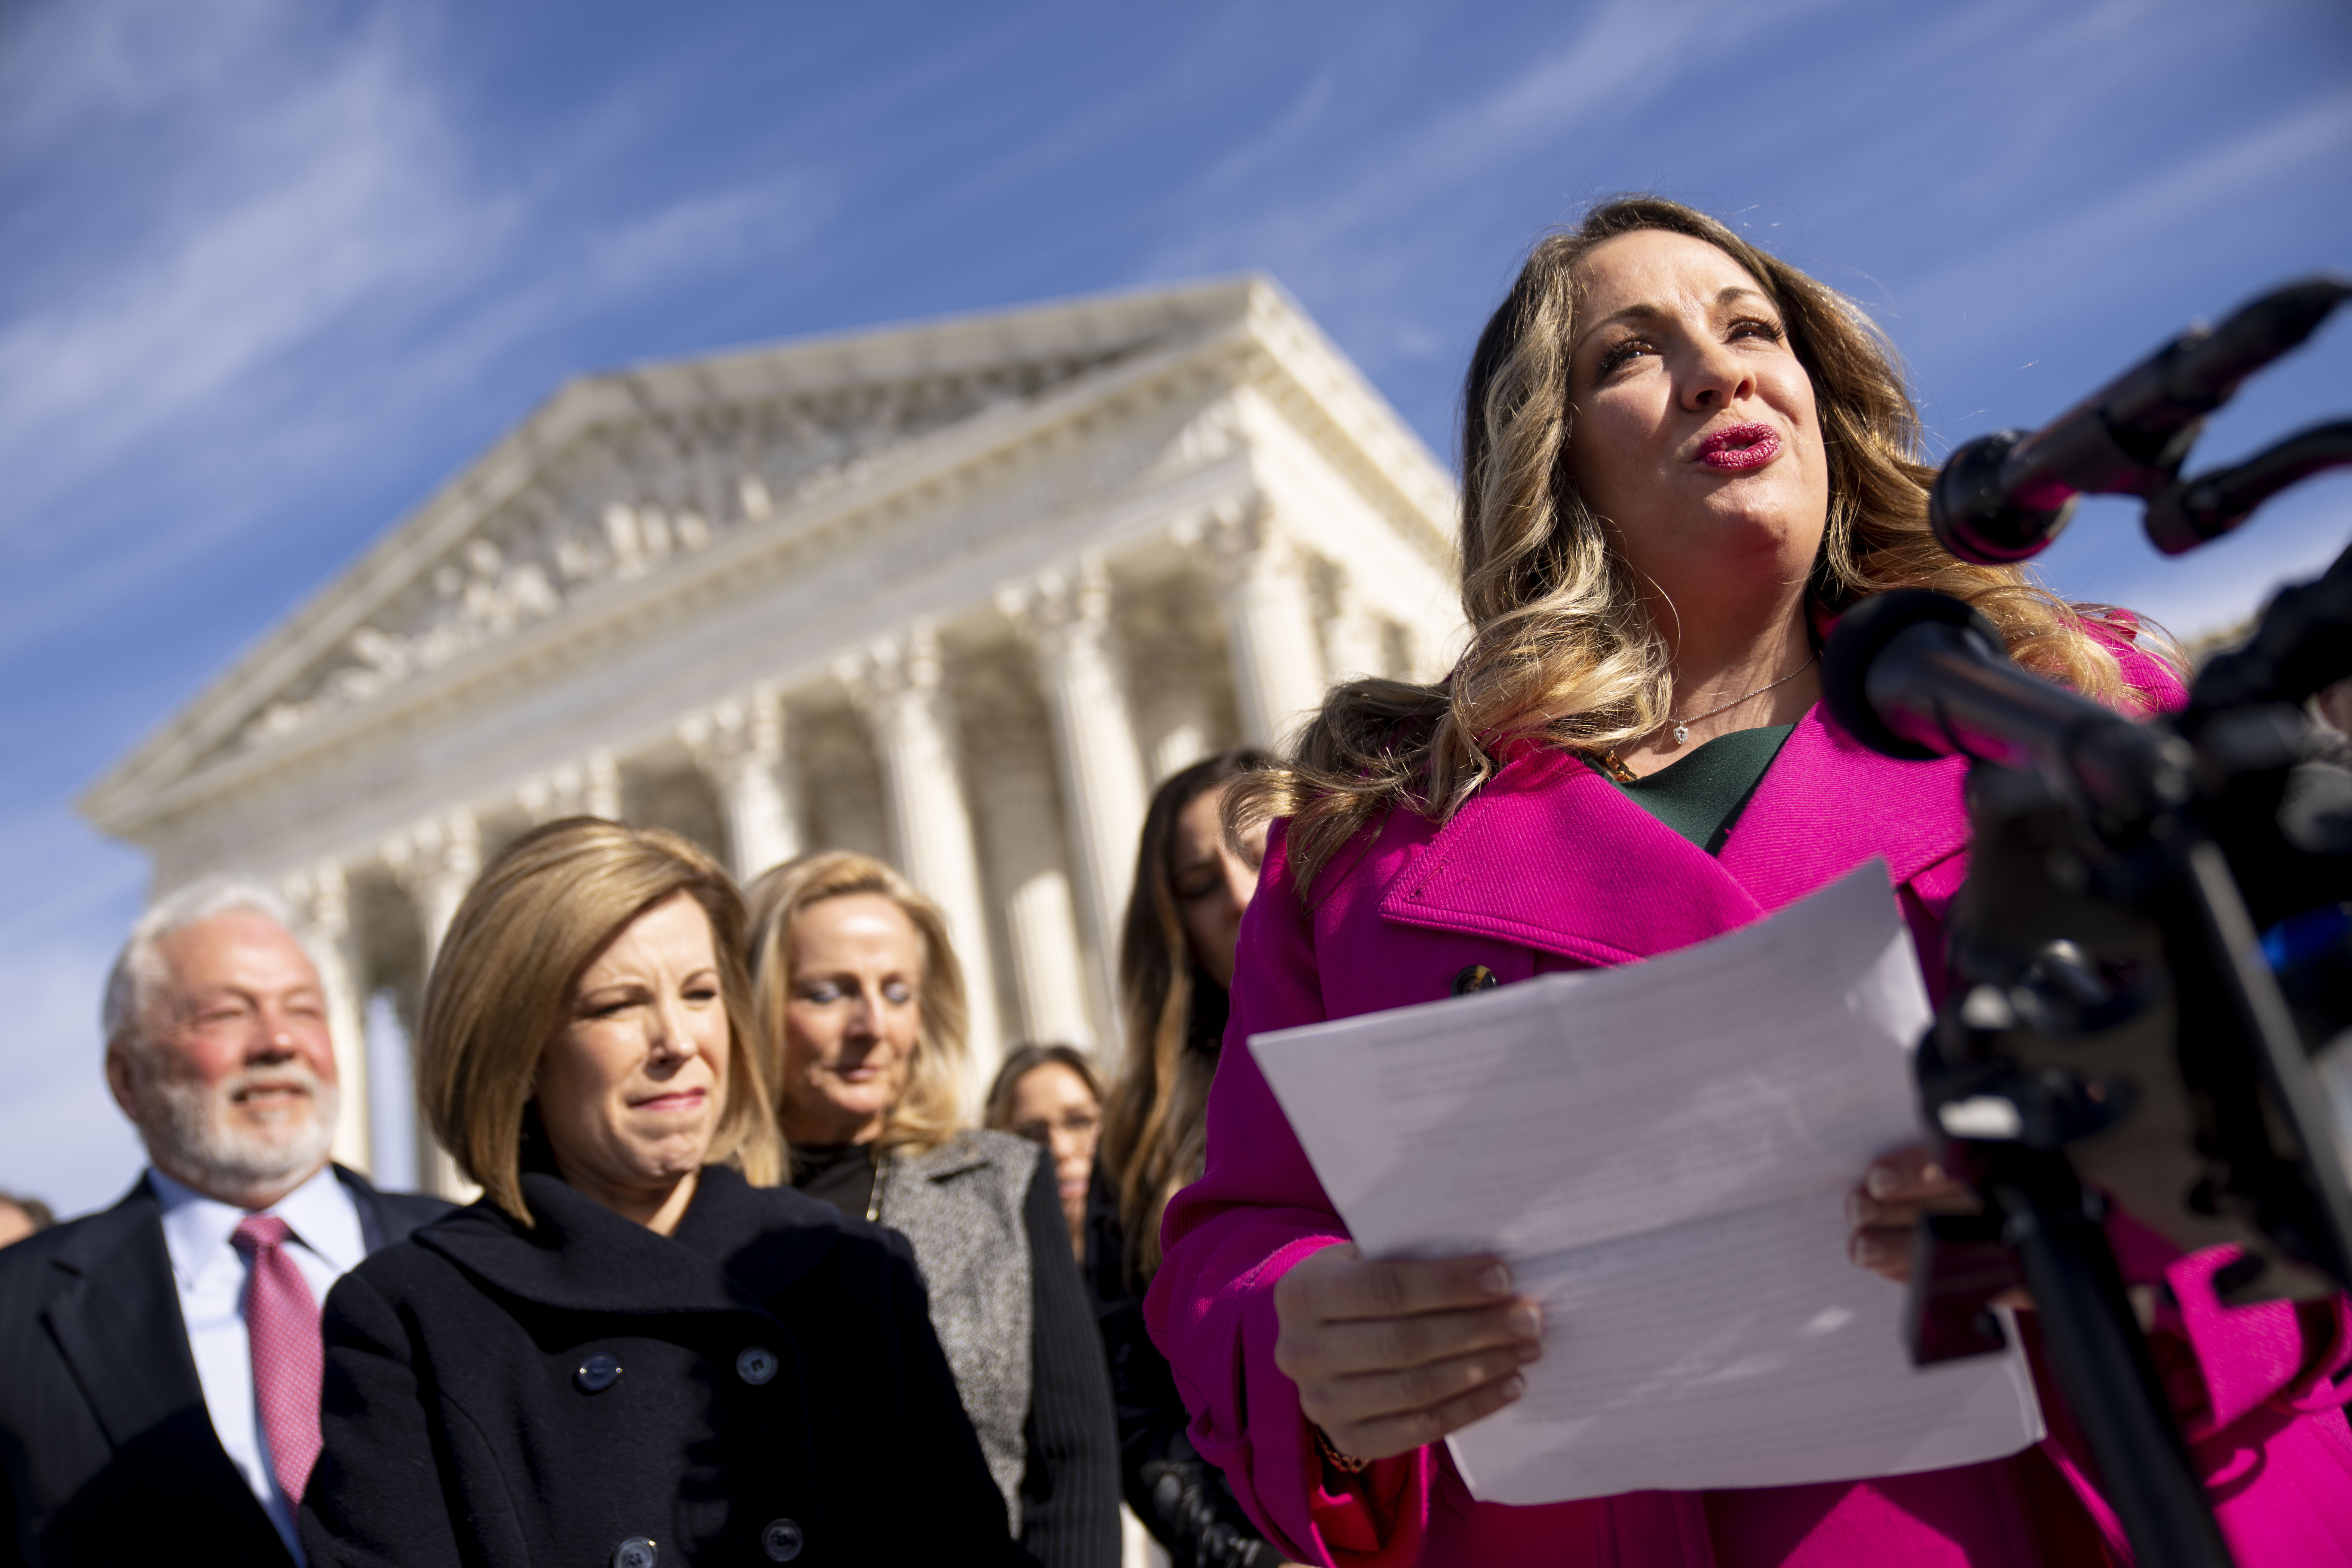 In a defeat for gay rights, the Supreme Court's conservative majority ruled Friday that a Christian...